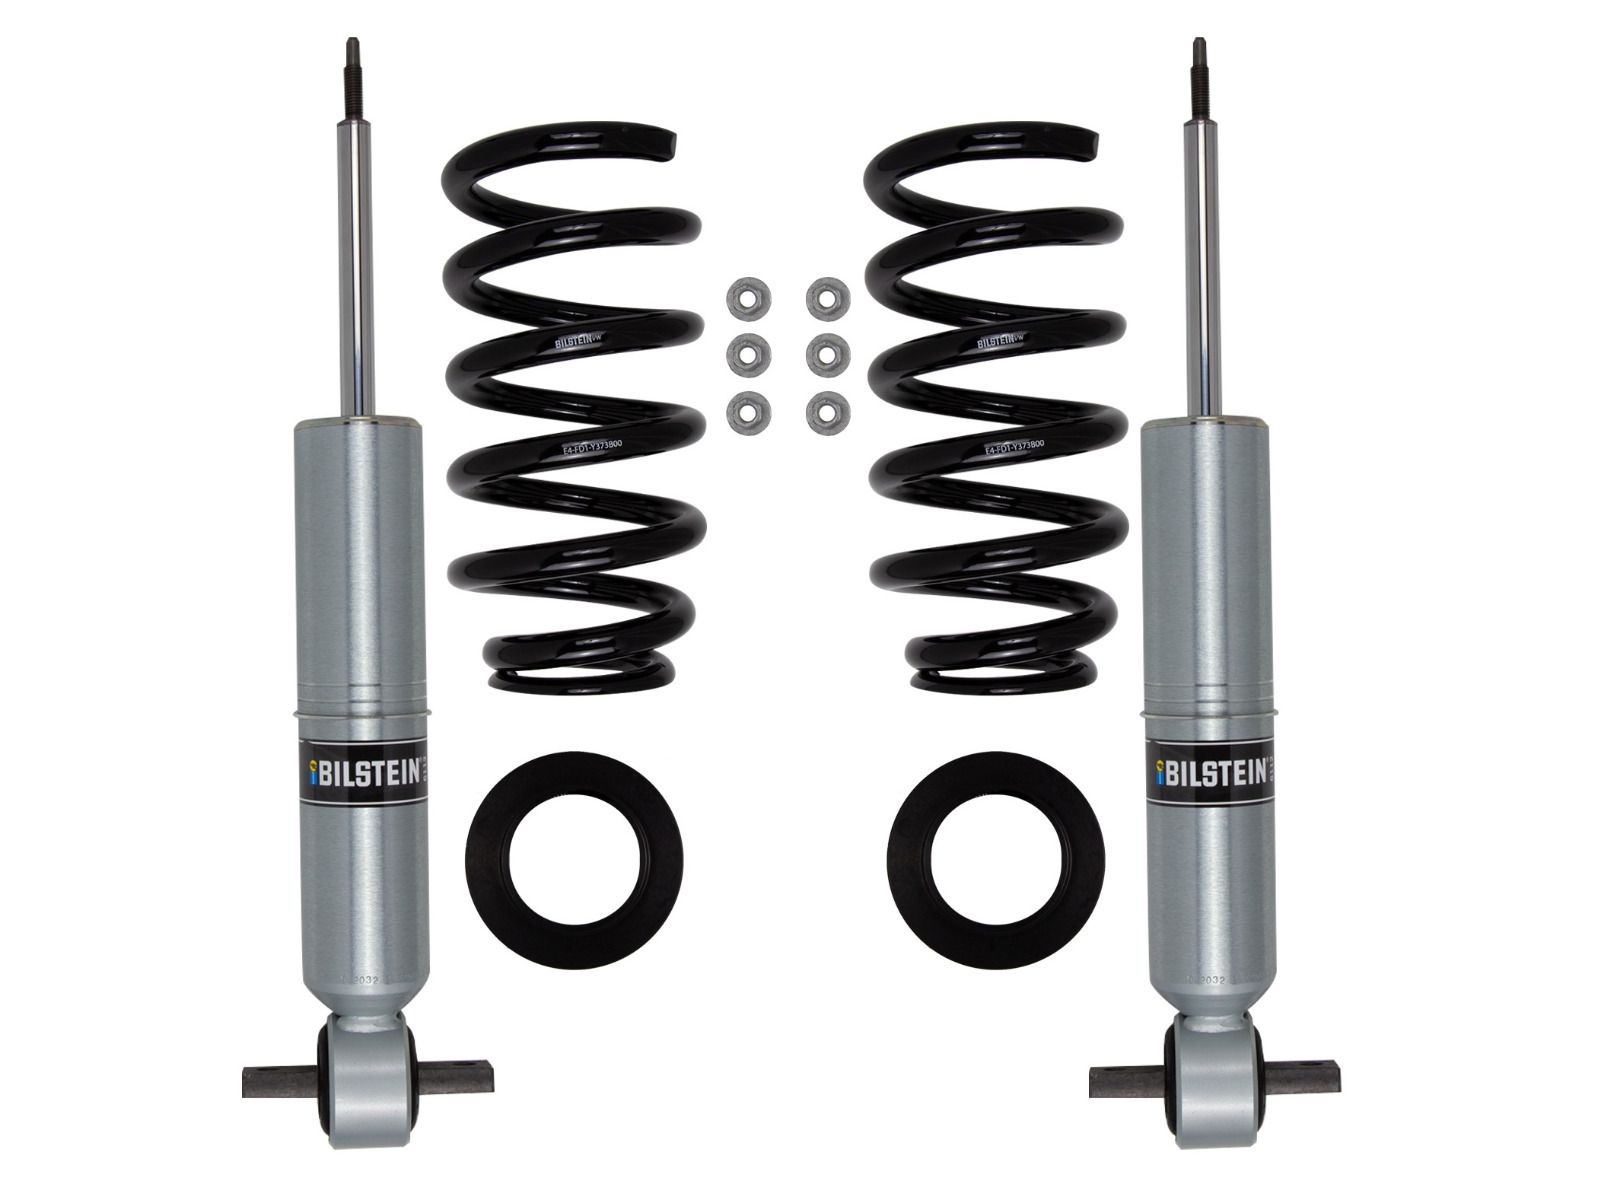 Silverado 1500 2014-2018 Chevy 4WD - Bilstein FRONT 6112 Series Coil-Over Kit (Adjustable Height 1.85"- 2.75" Front Lift)